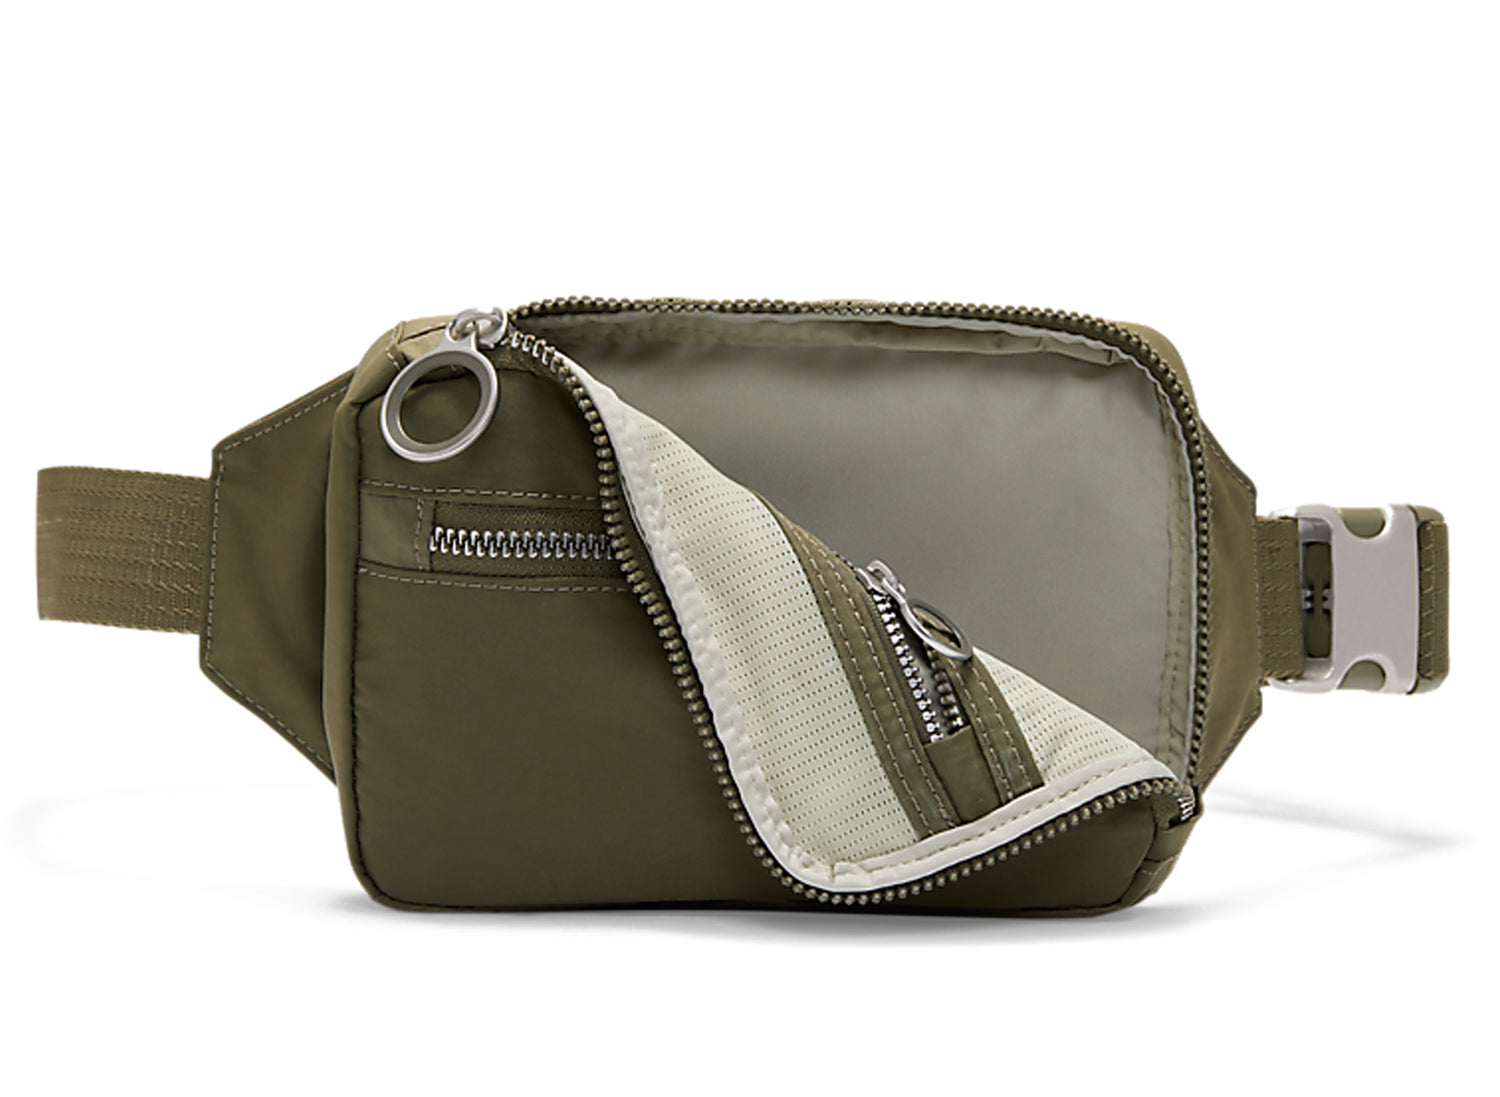 Heritage Waist Pack | Shop Foster eCommerce